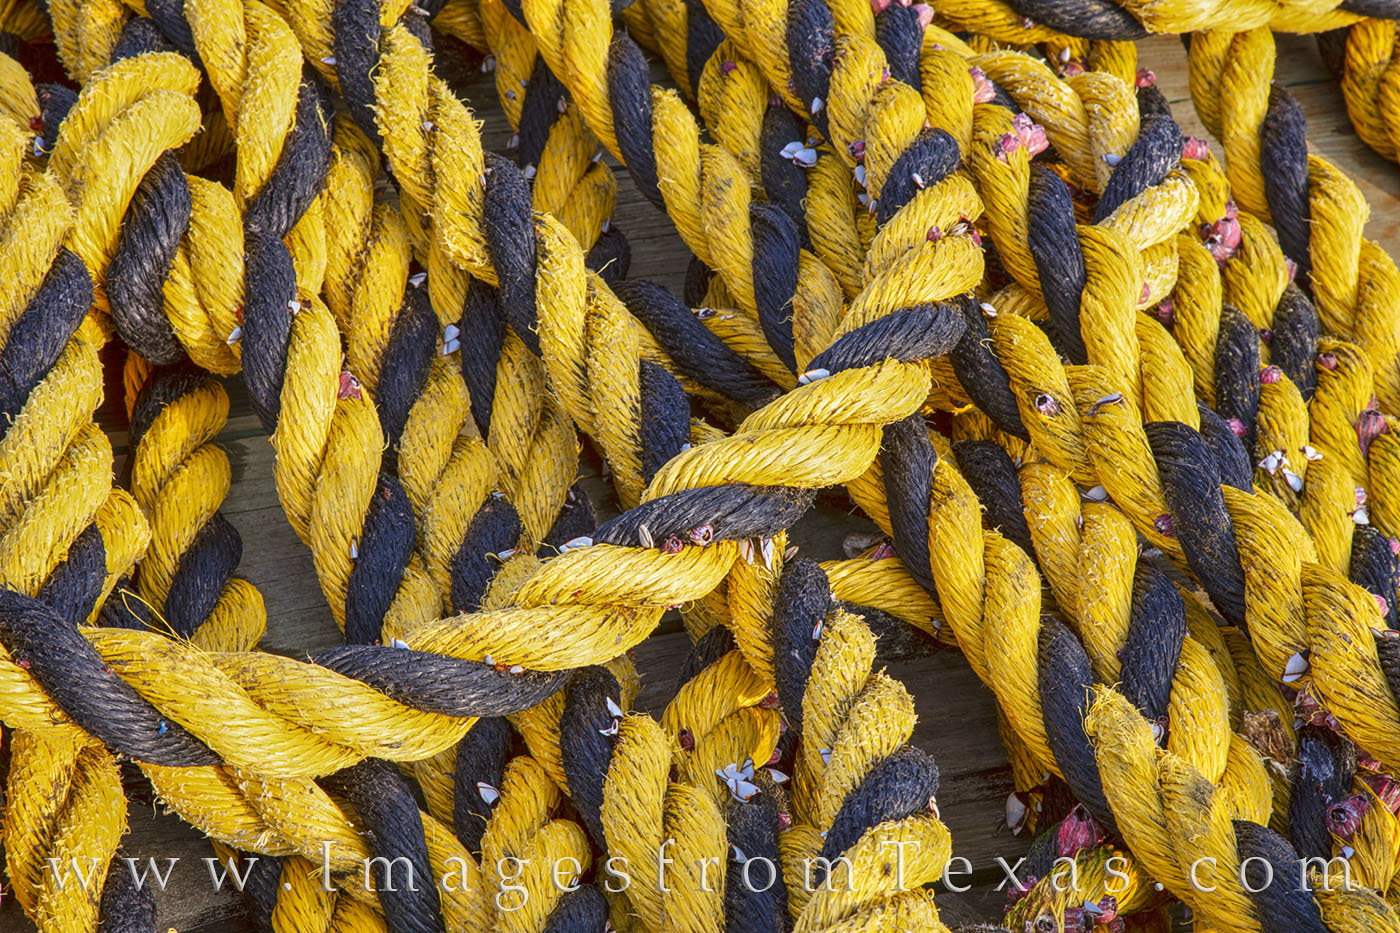 Along a dock in Port Isabel, small periwinkles cover a black and yellow rope. Floating in the harbor next to this dock was a...